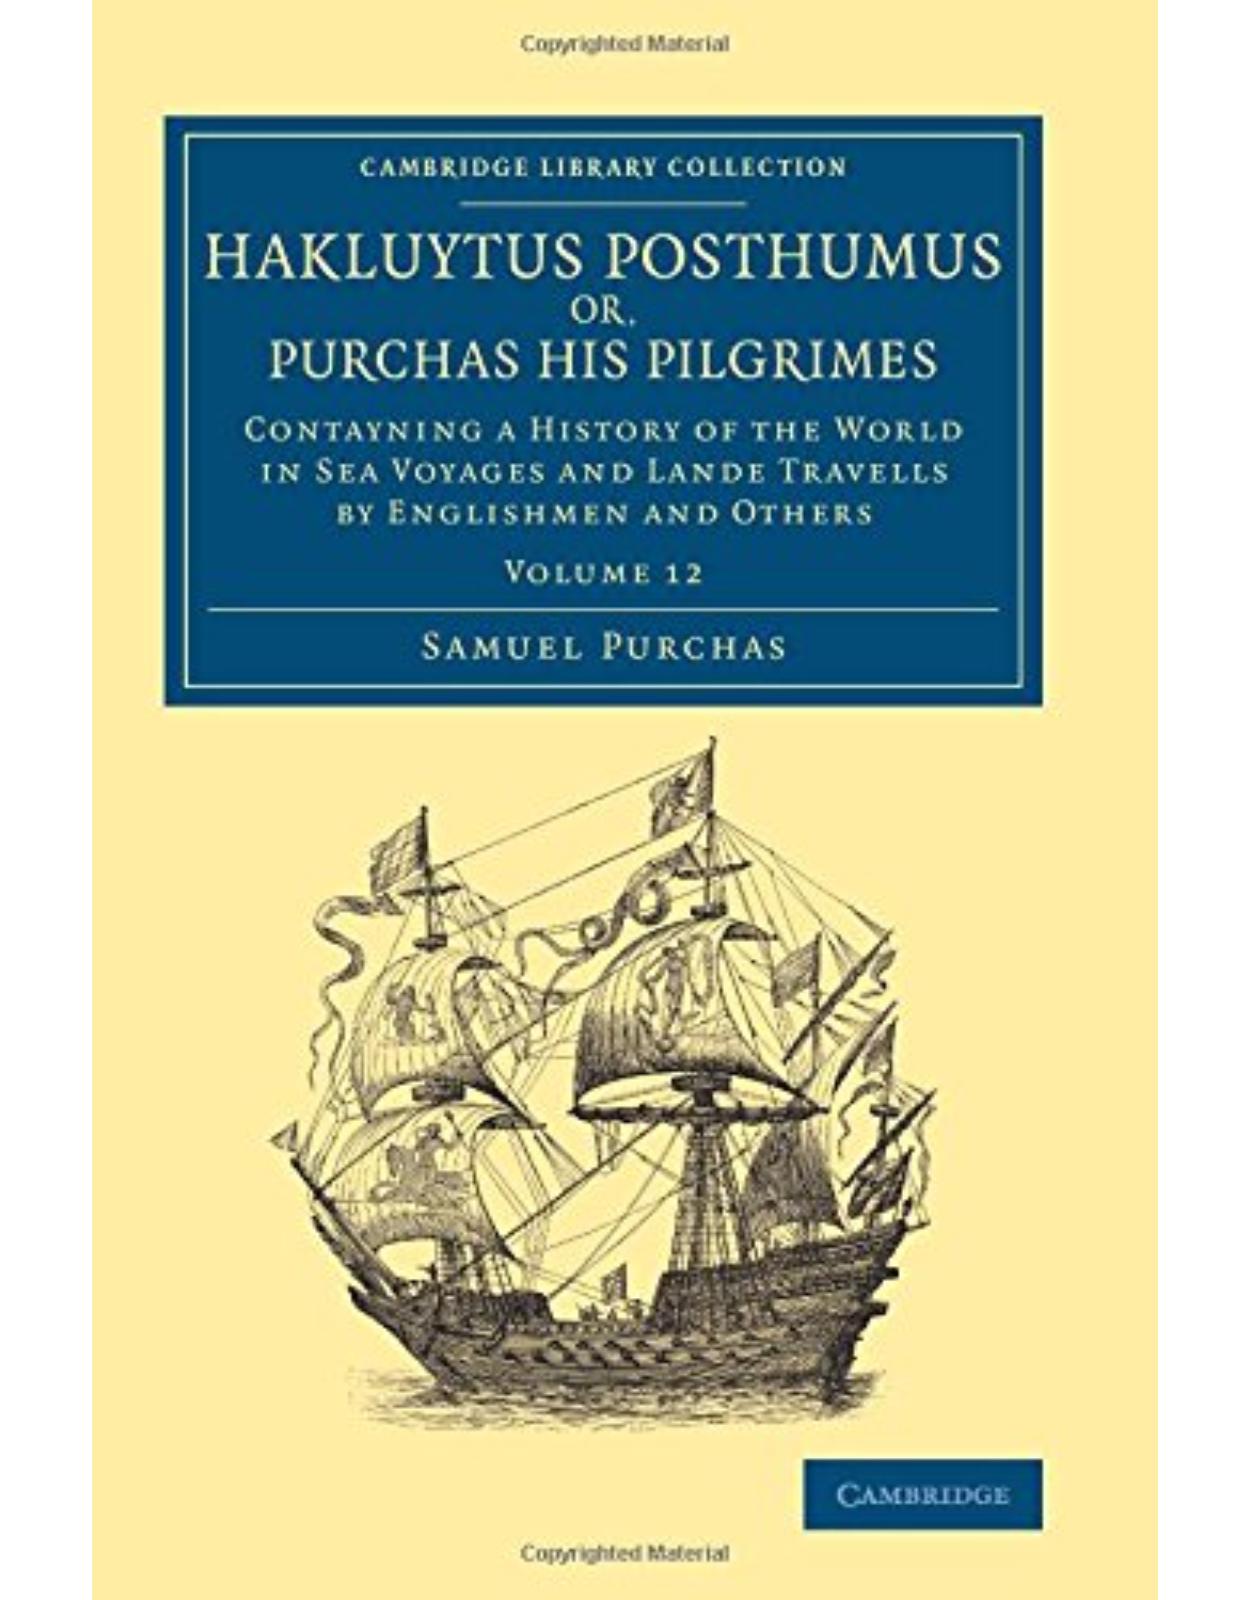 Hakluytus Posthumus or, Purchas his Pilgrimes: Contayning a History of the World in Sea Voyages and Lande Travells by Englishmen and Others (Volume 12)